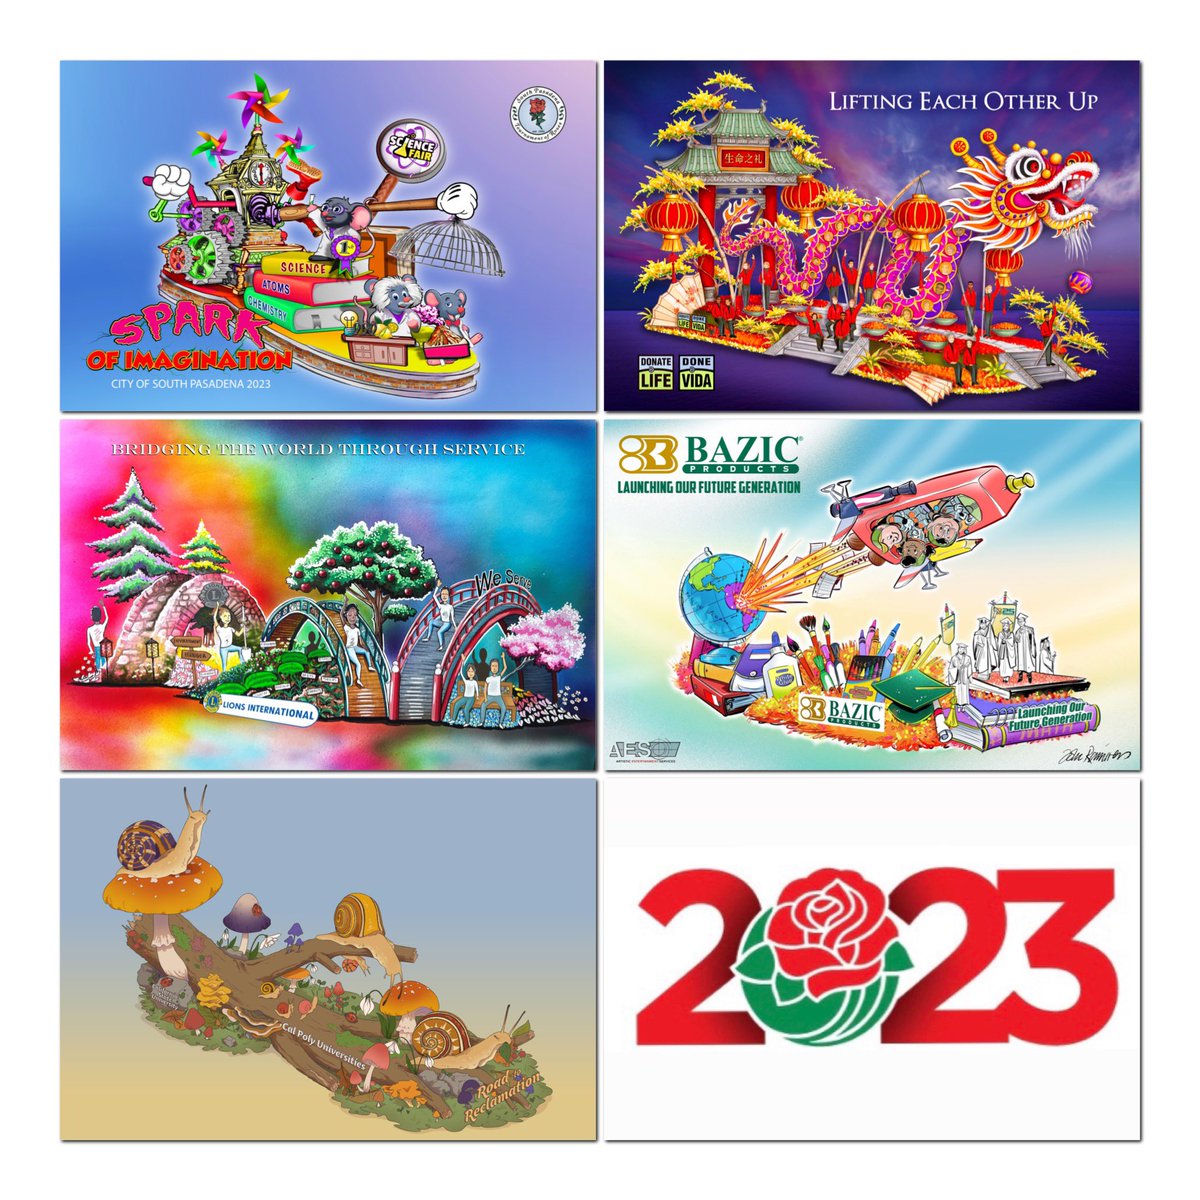 FIRST SNEAK PEEK AT 2023 FLOATS! We’re excited to present the first in a series of sneak previews of our floral float entries. @BazicProducts @CPRoseFloat @SPRoseFloat @DonateLifeFloat @lionsclubs Check out the exciting float details here: tournamentofroses.com/2023-first-flo…